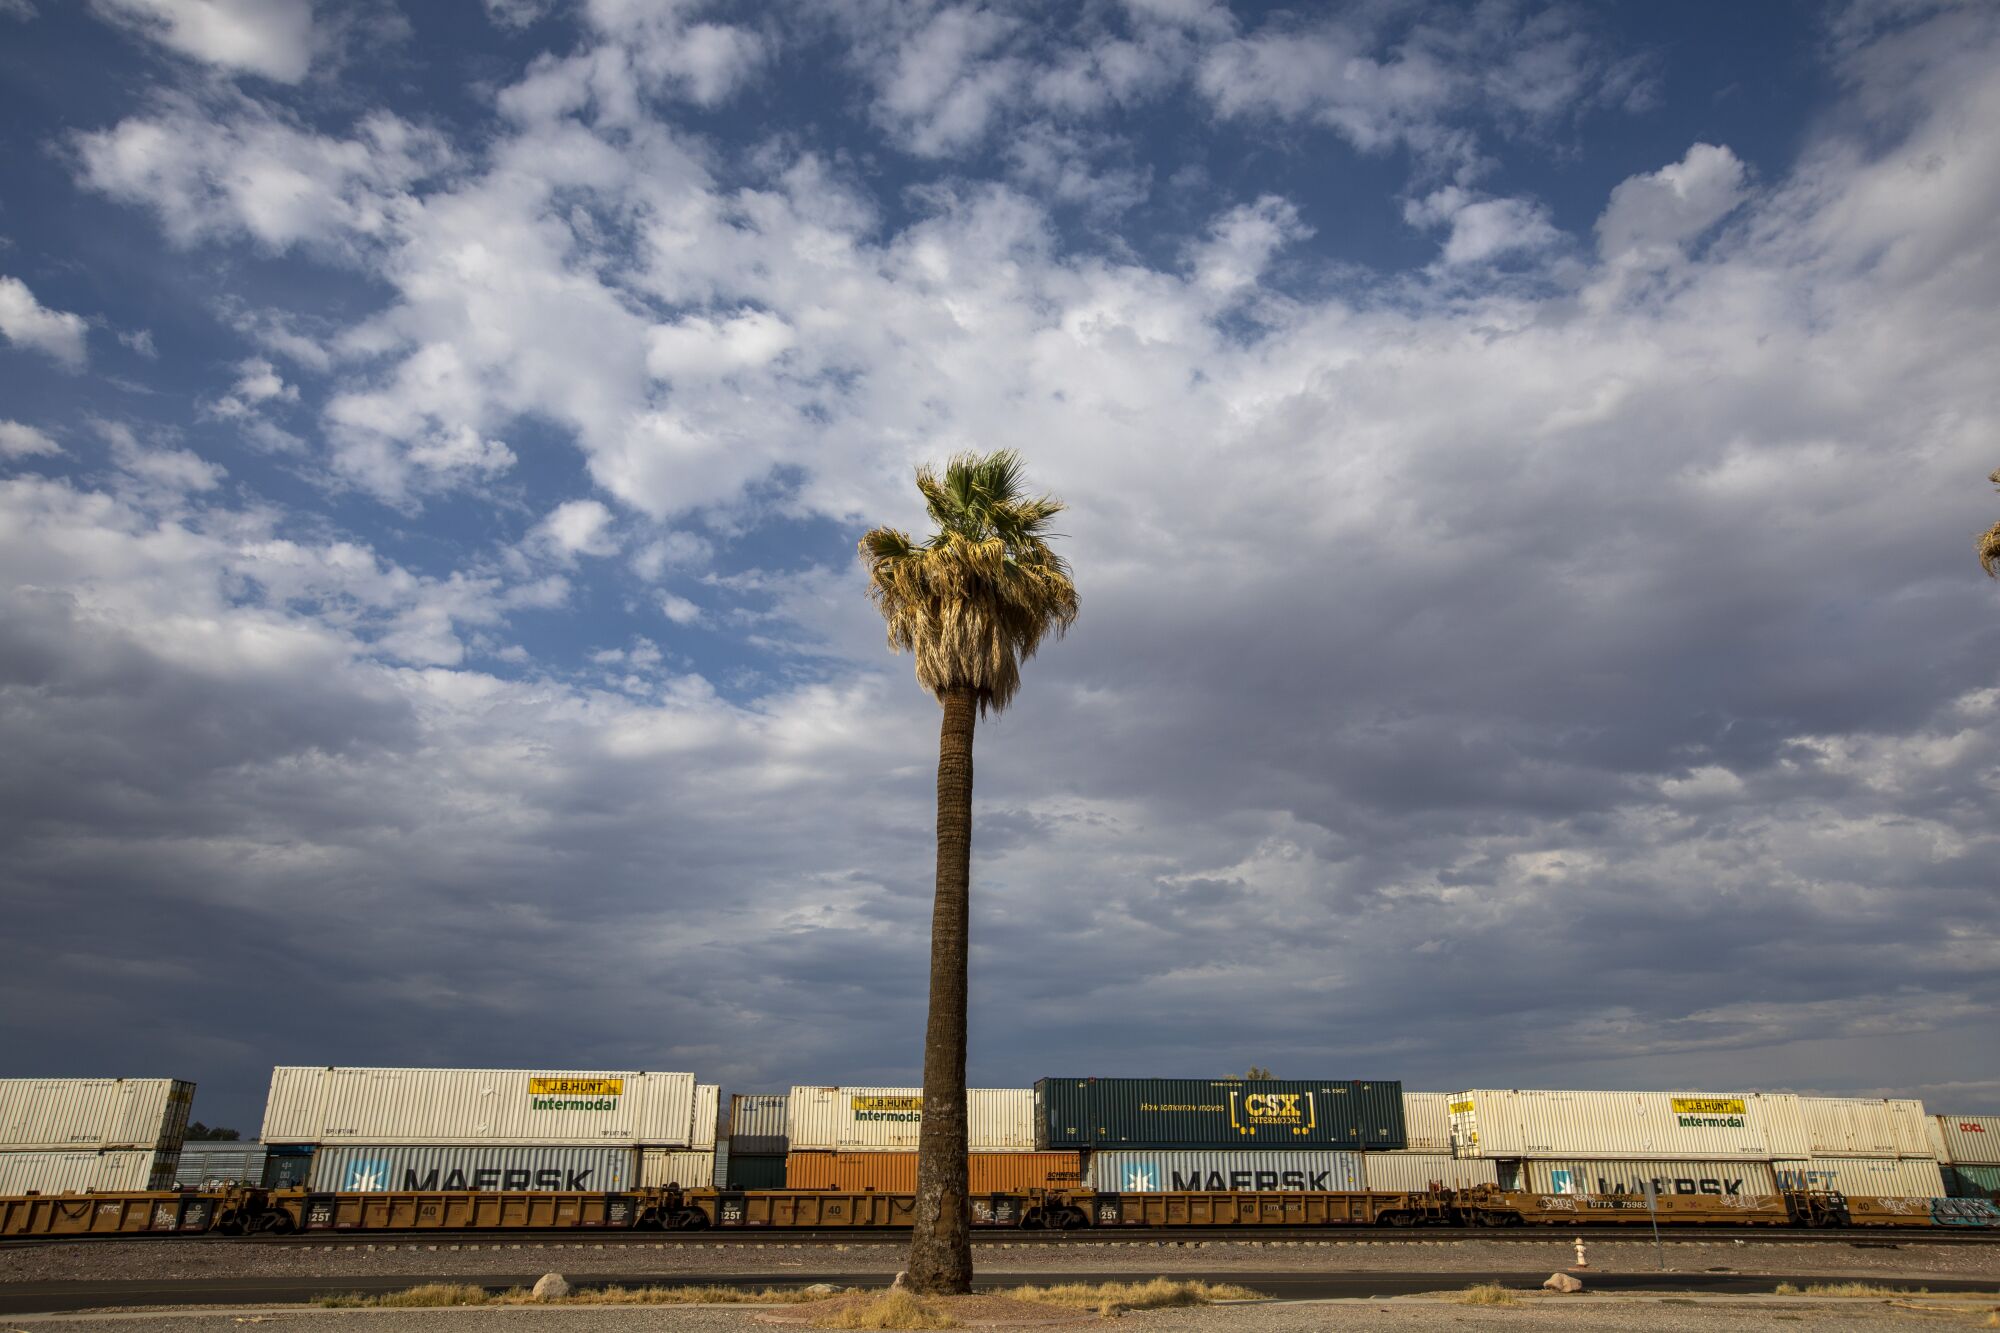 A palm tree stands along tracks in a railroad yard in the Mojave desert town of Needles.